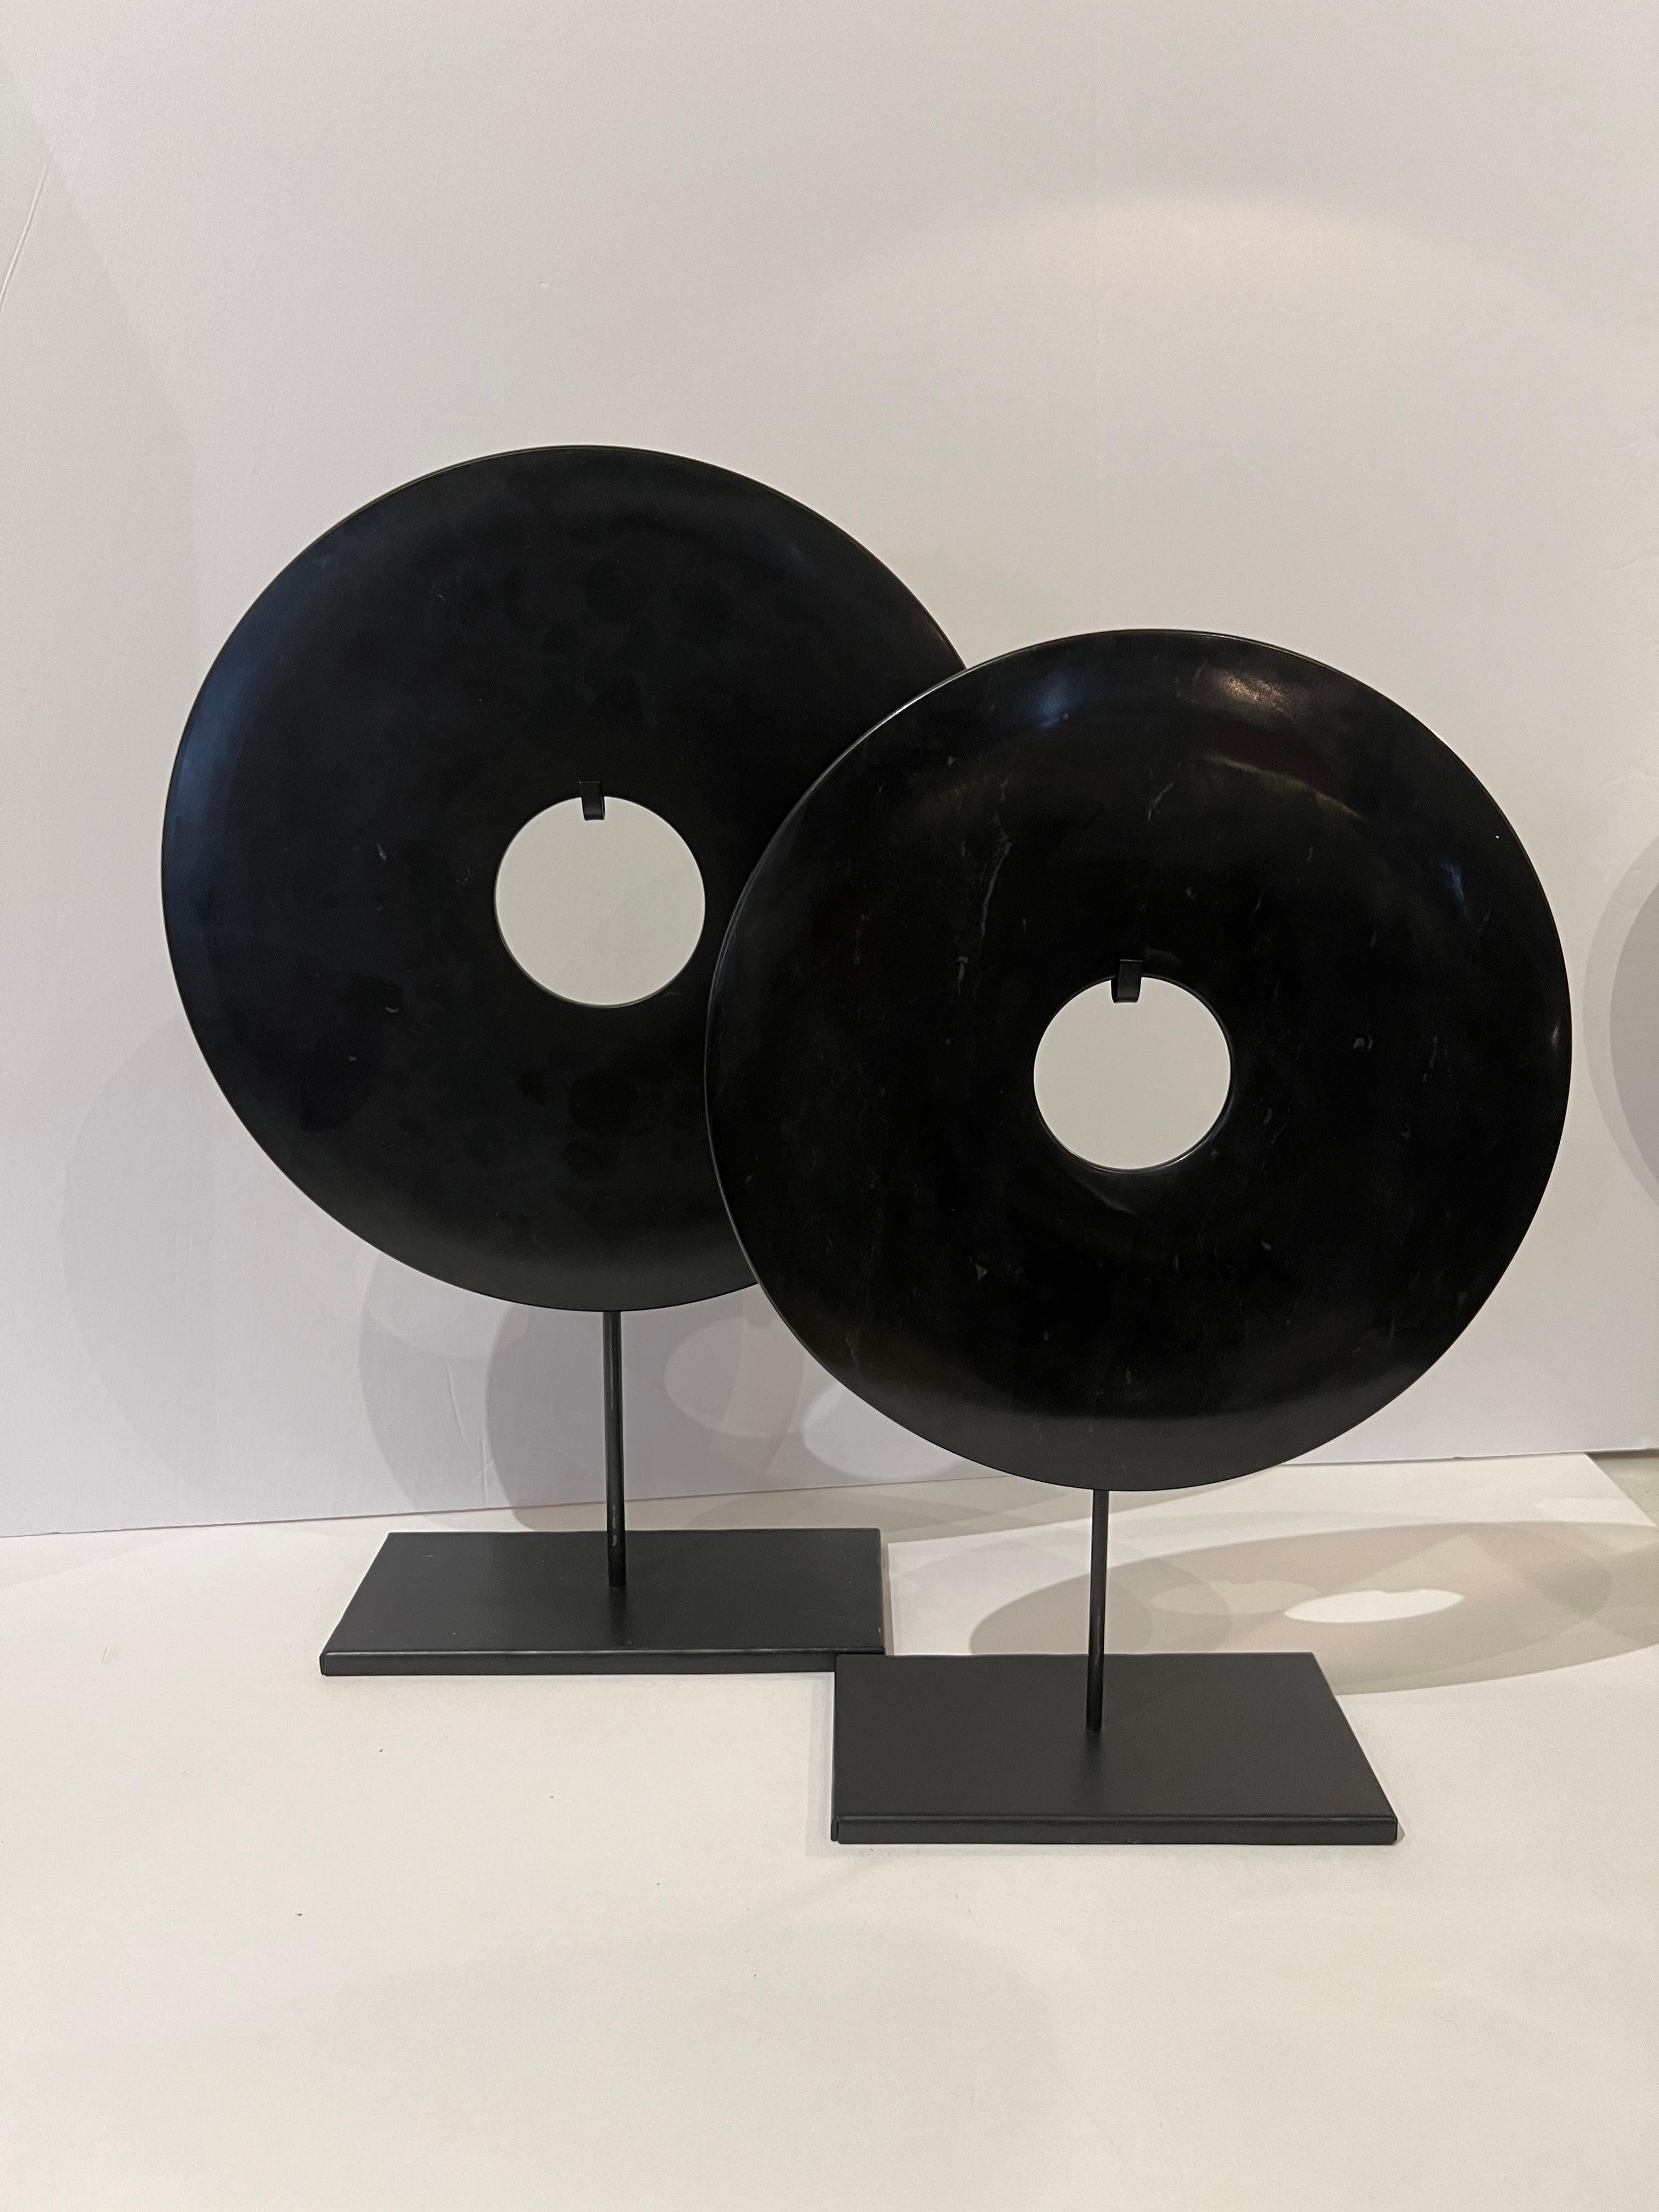 Contemporary Chinese two smooth black jade discs.
Also available in white ( S6449 )
One disc measures 12